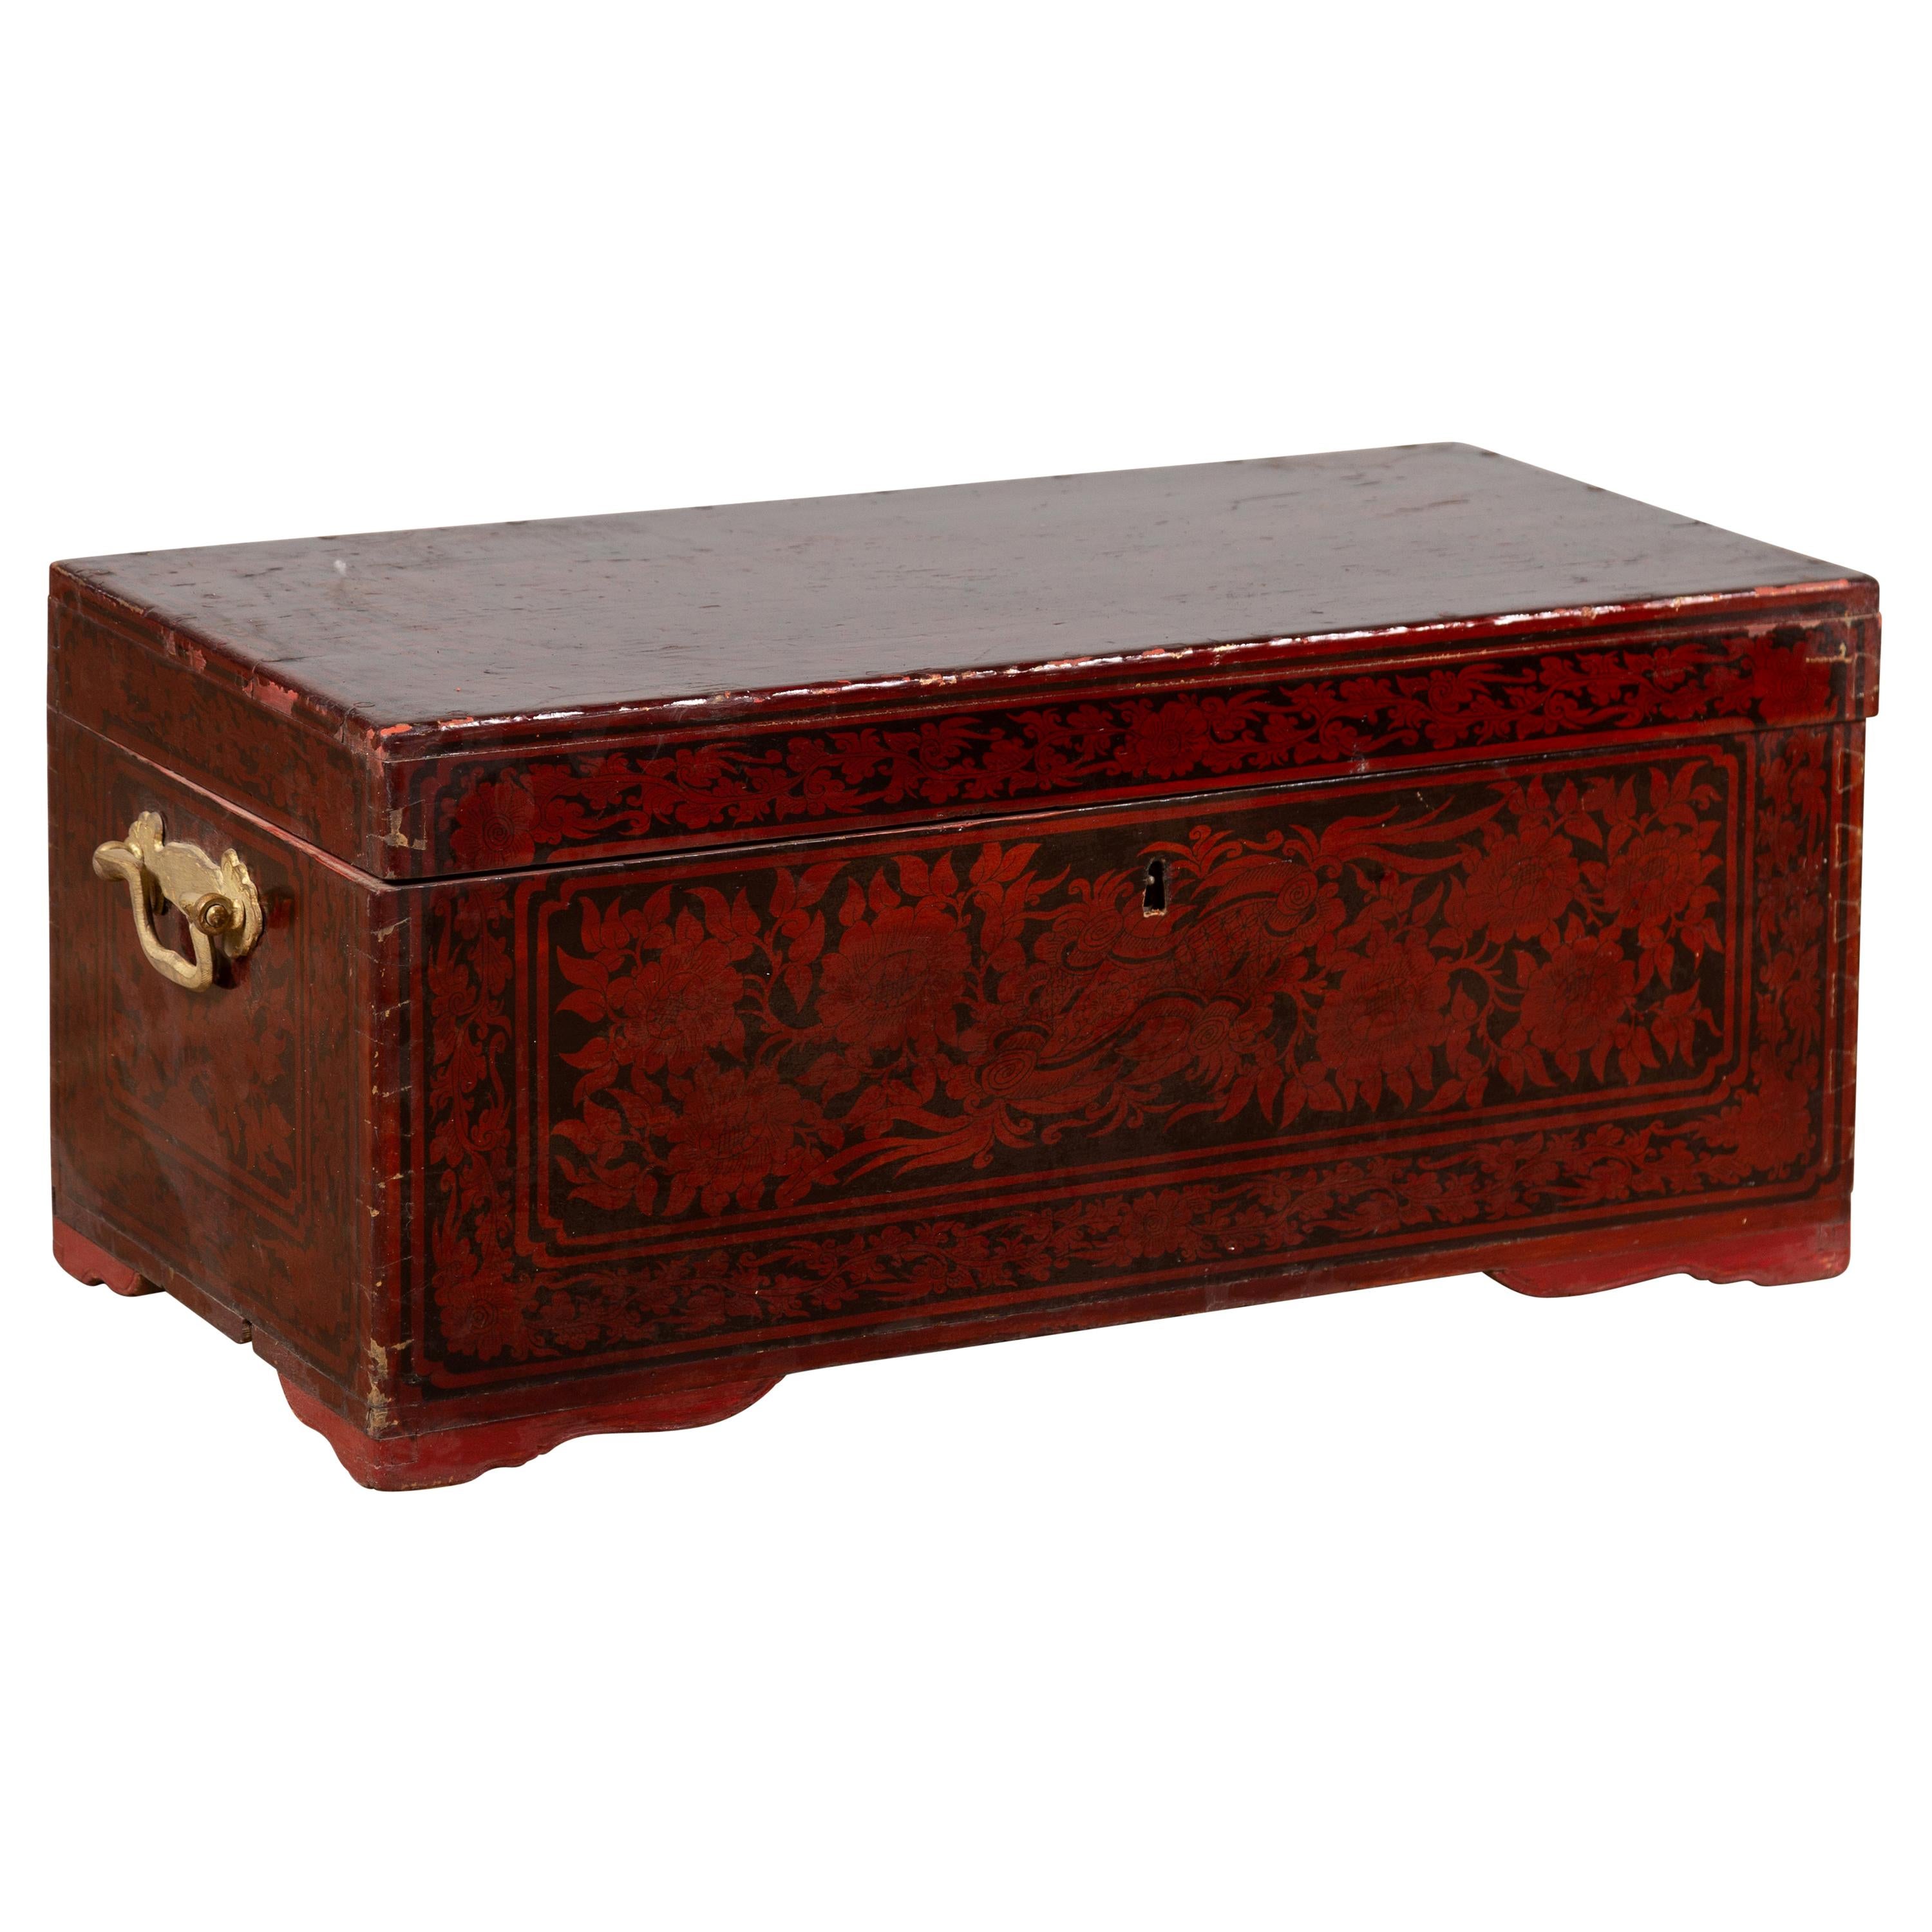 Vintage Lacquered Leather Chest with Burgundy Patina from Palembang, Sumatra